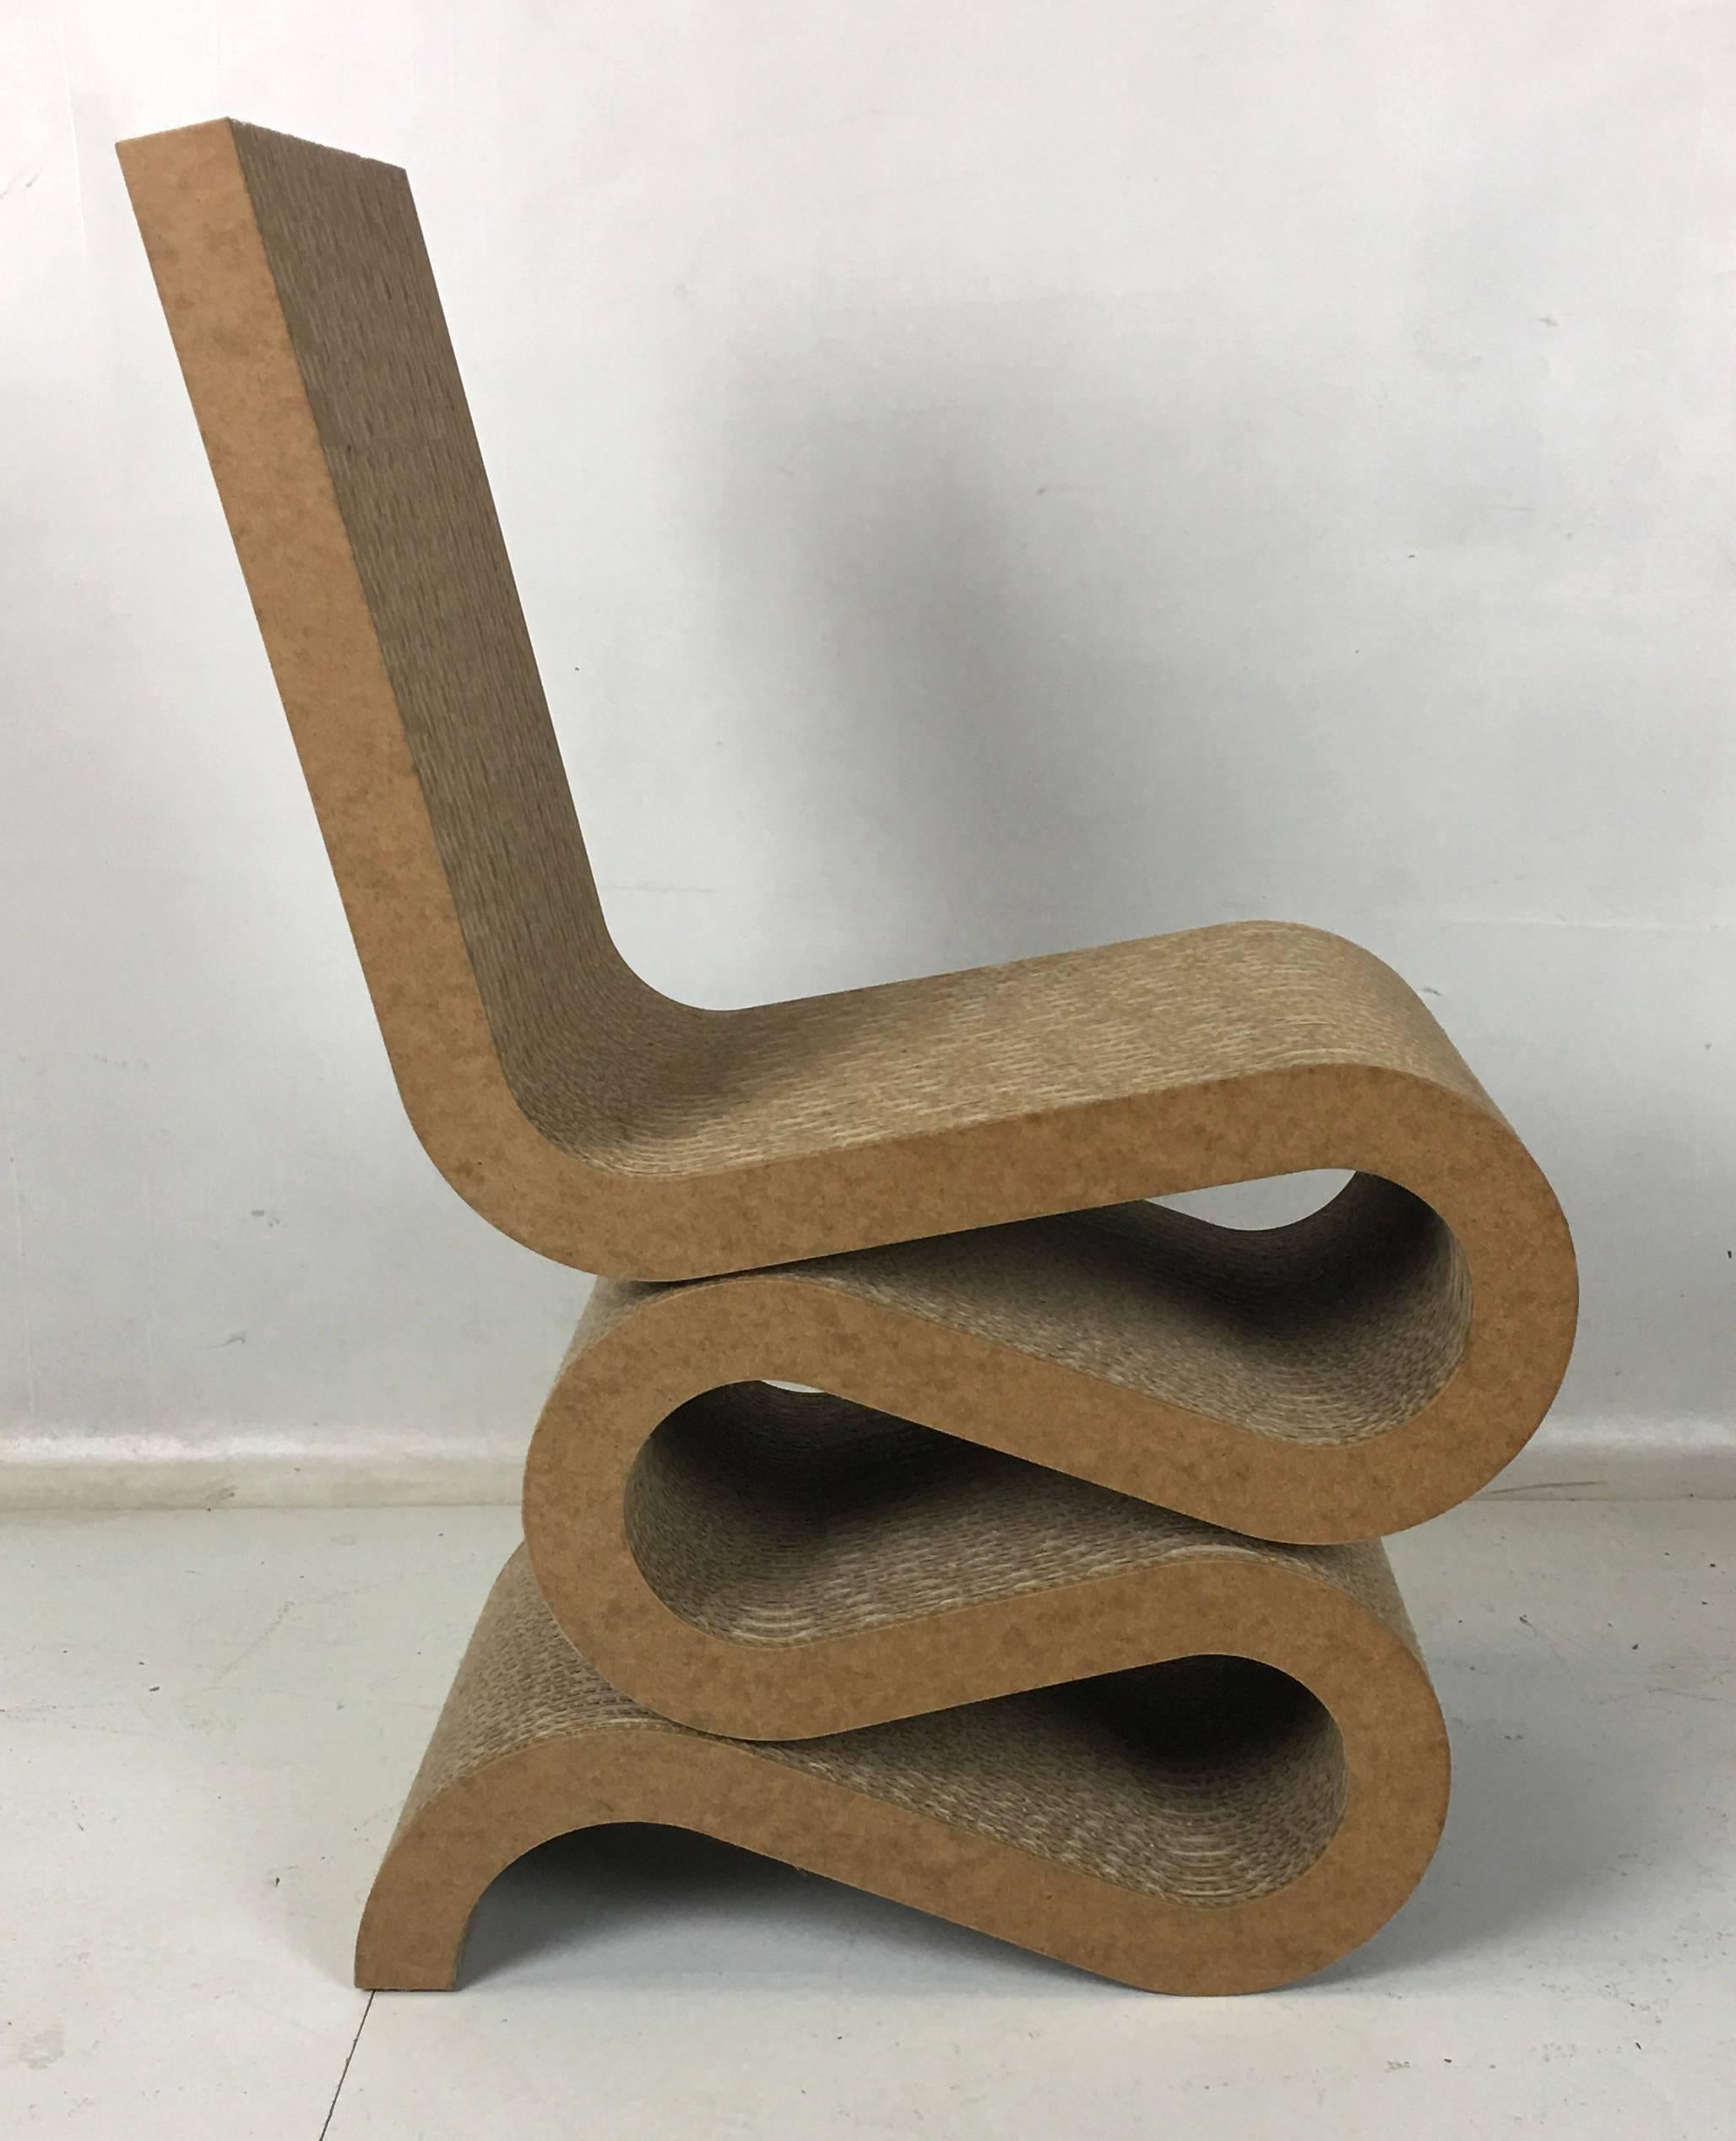 Cardboard and masonite Wiggle chair by Frank Gehry for Vitra. This example from early 2000s is in excellent original condition.